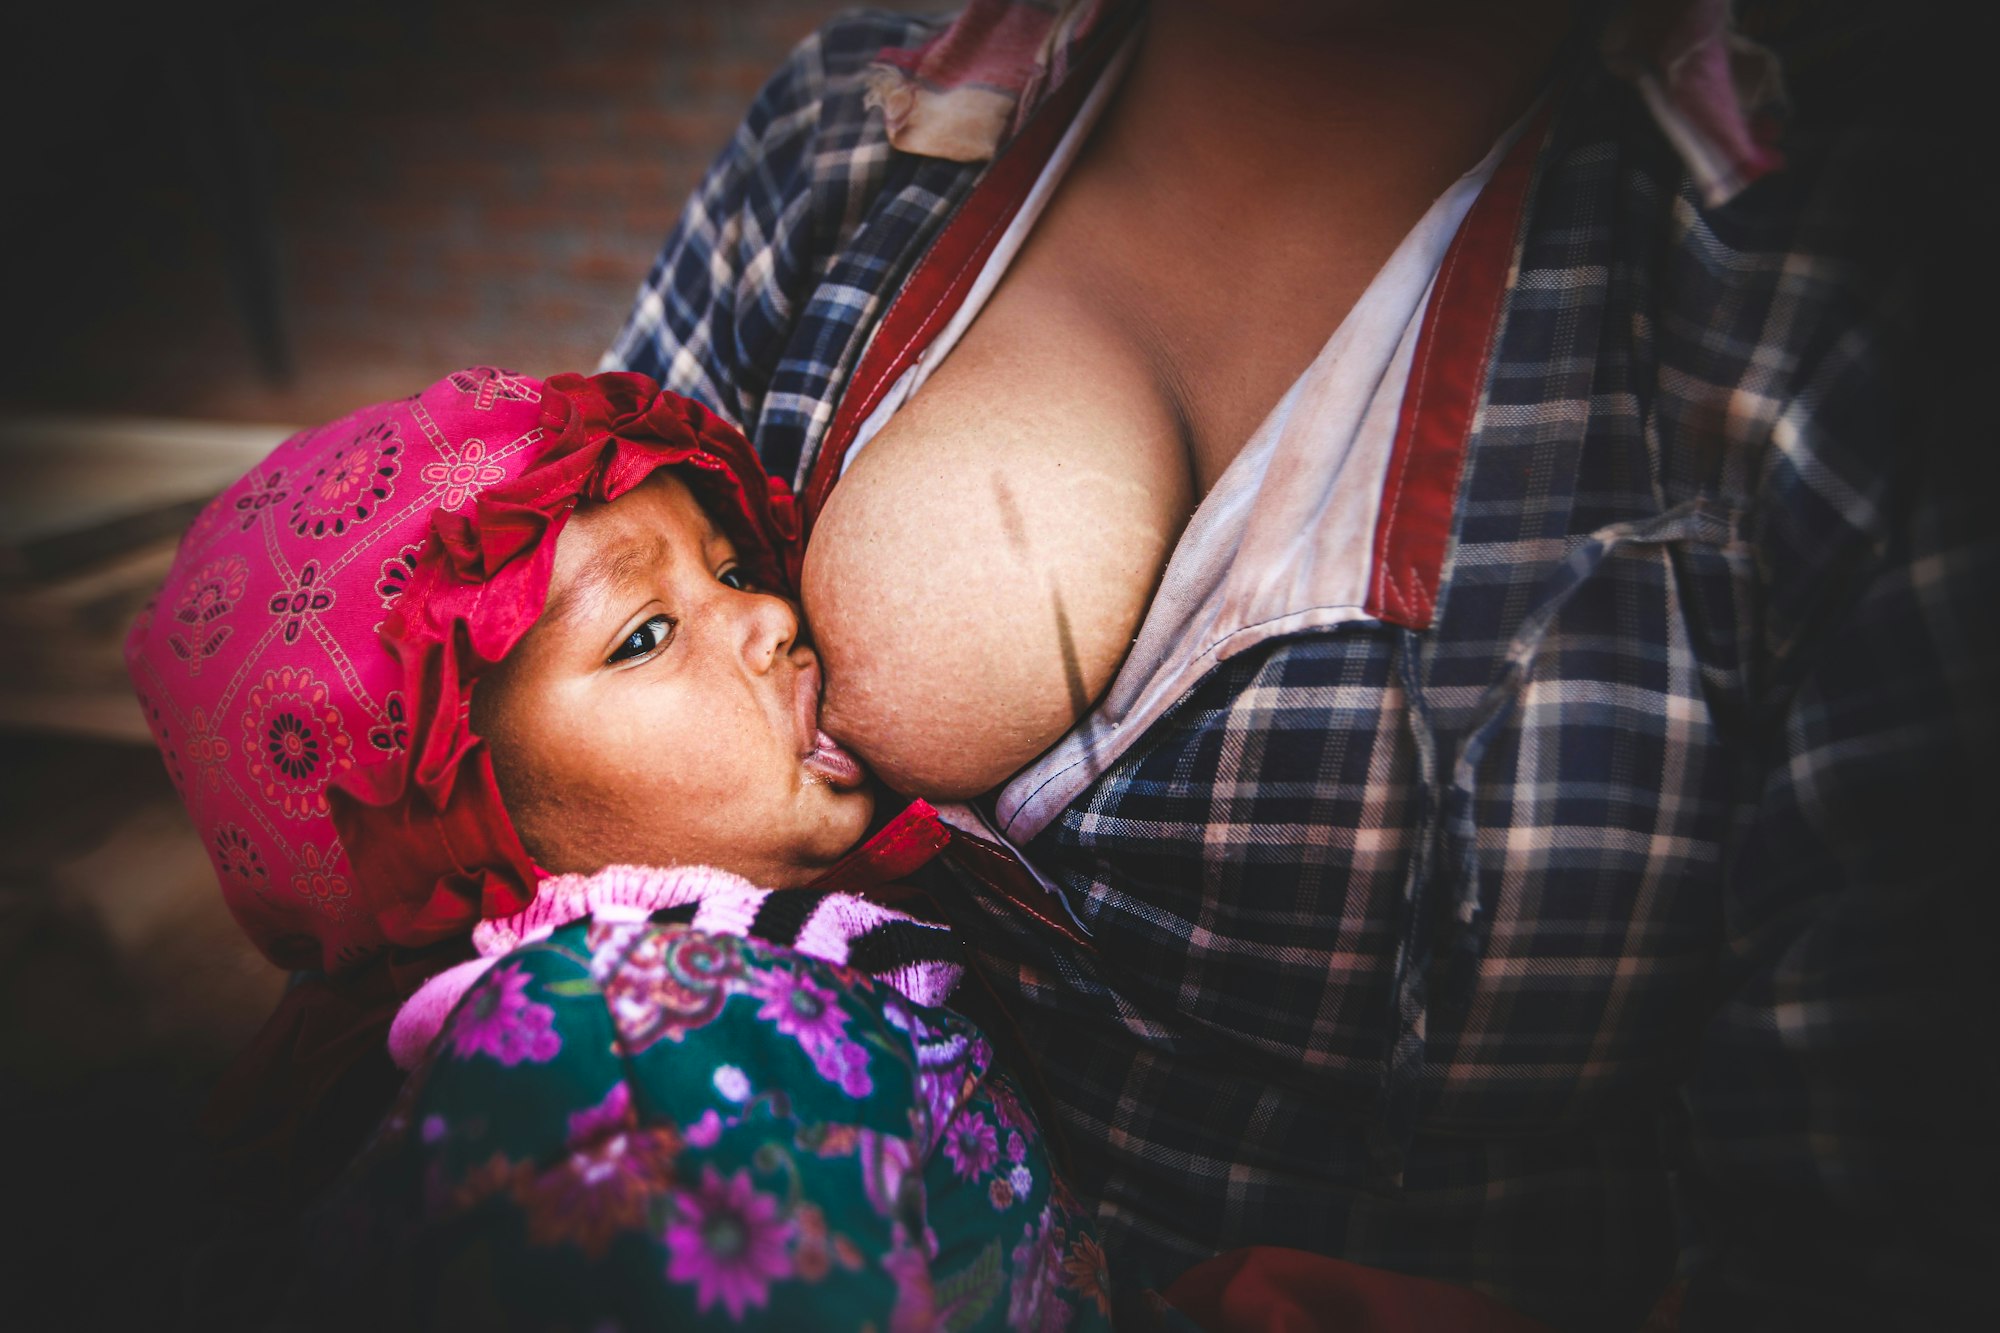 Can I Keep My Breasts From Leaking While Breastfeeding?